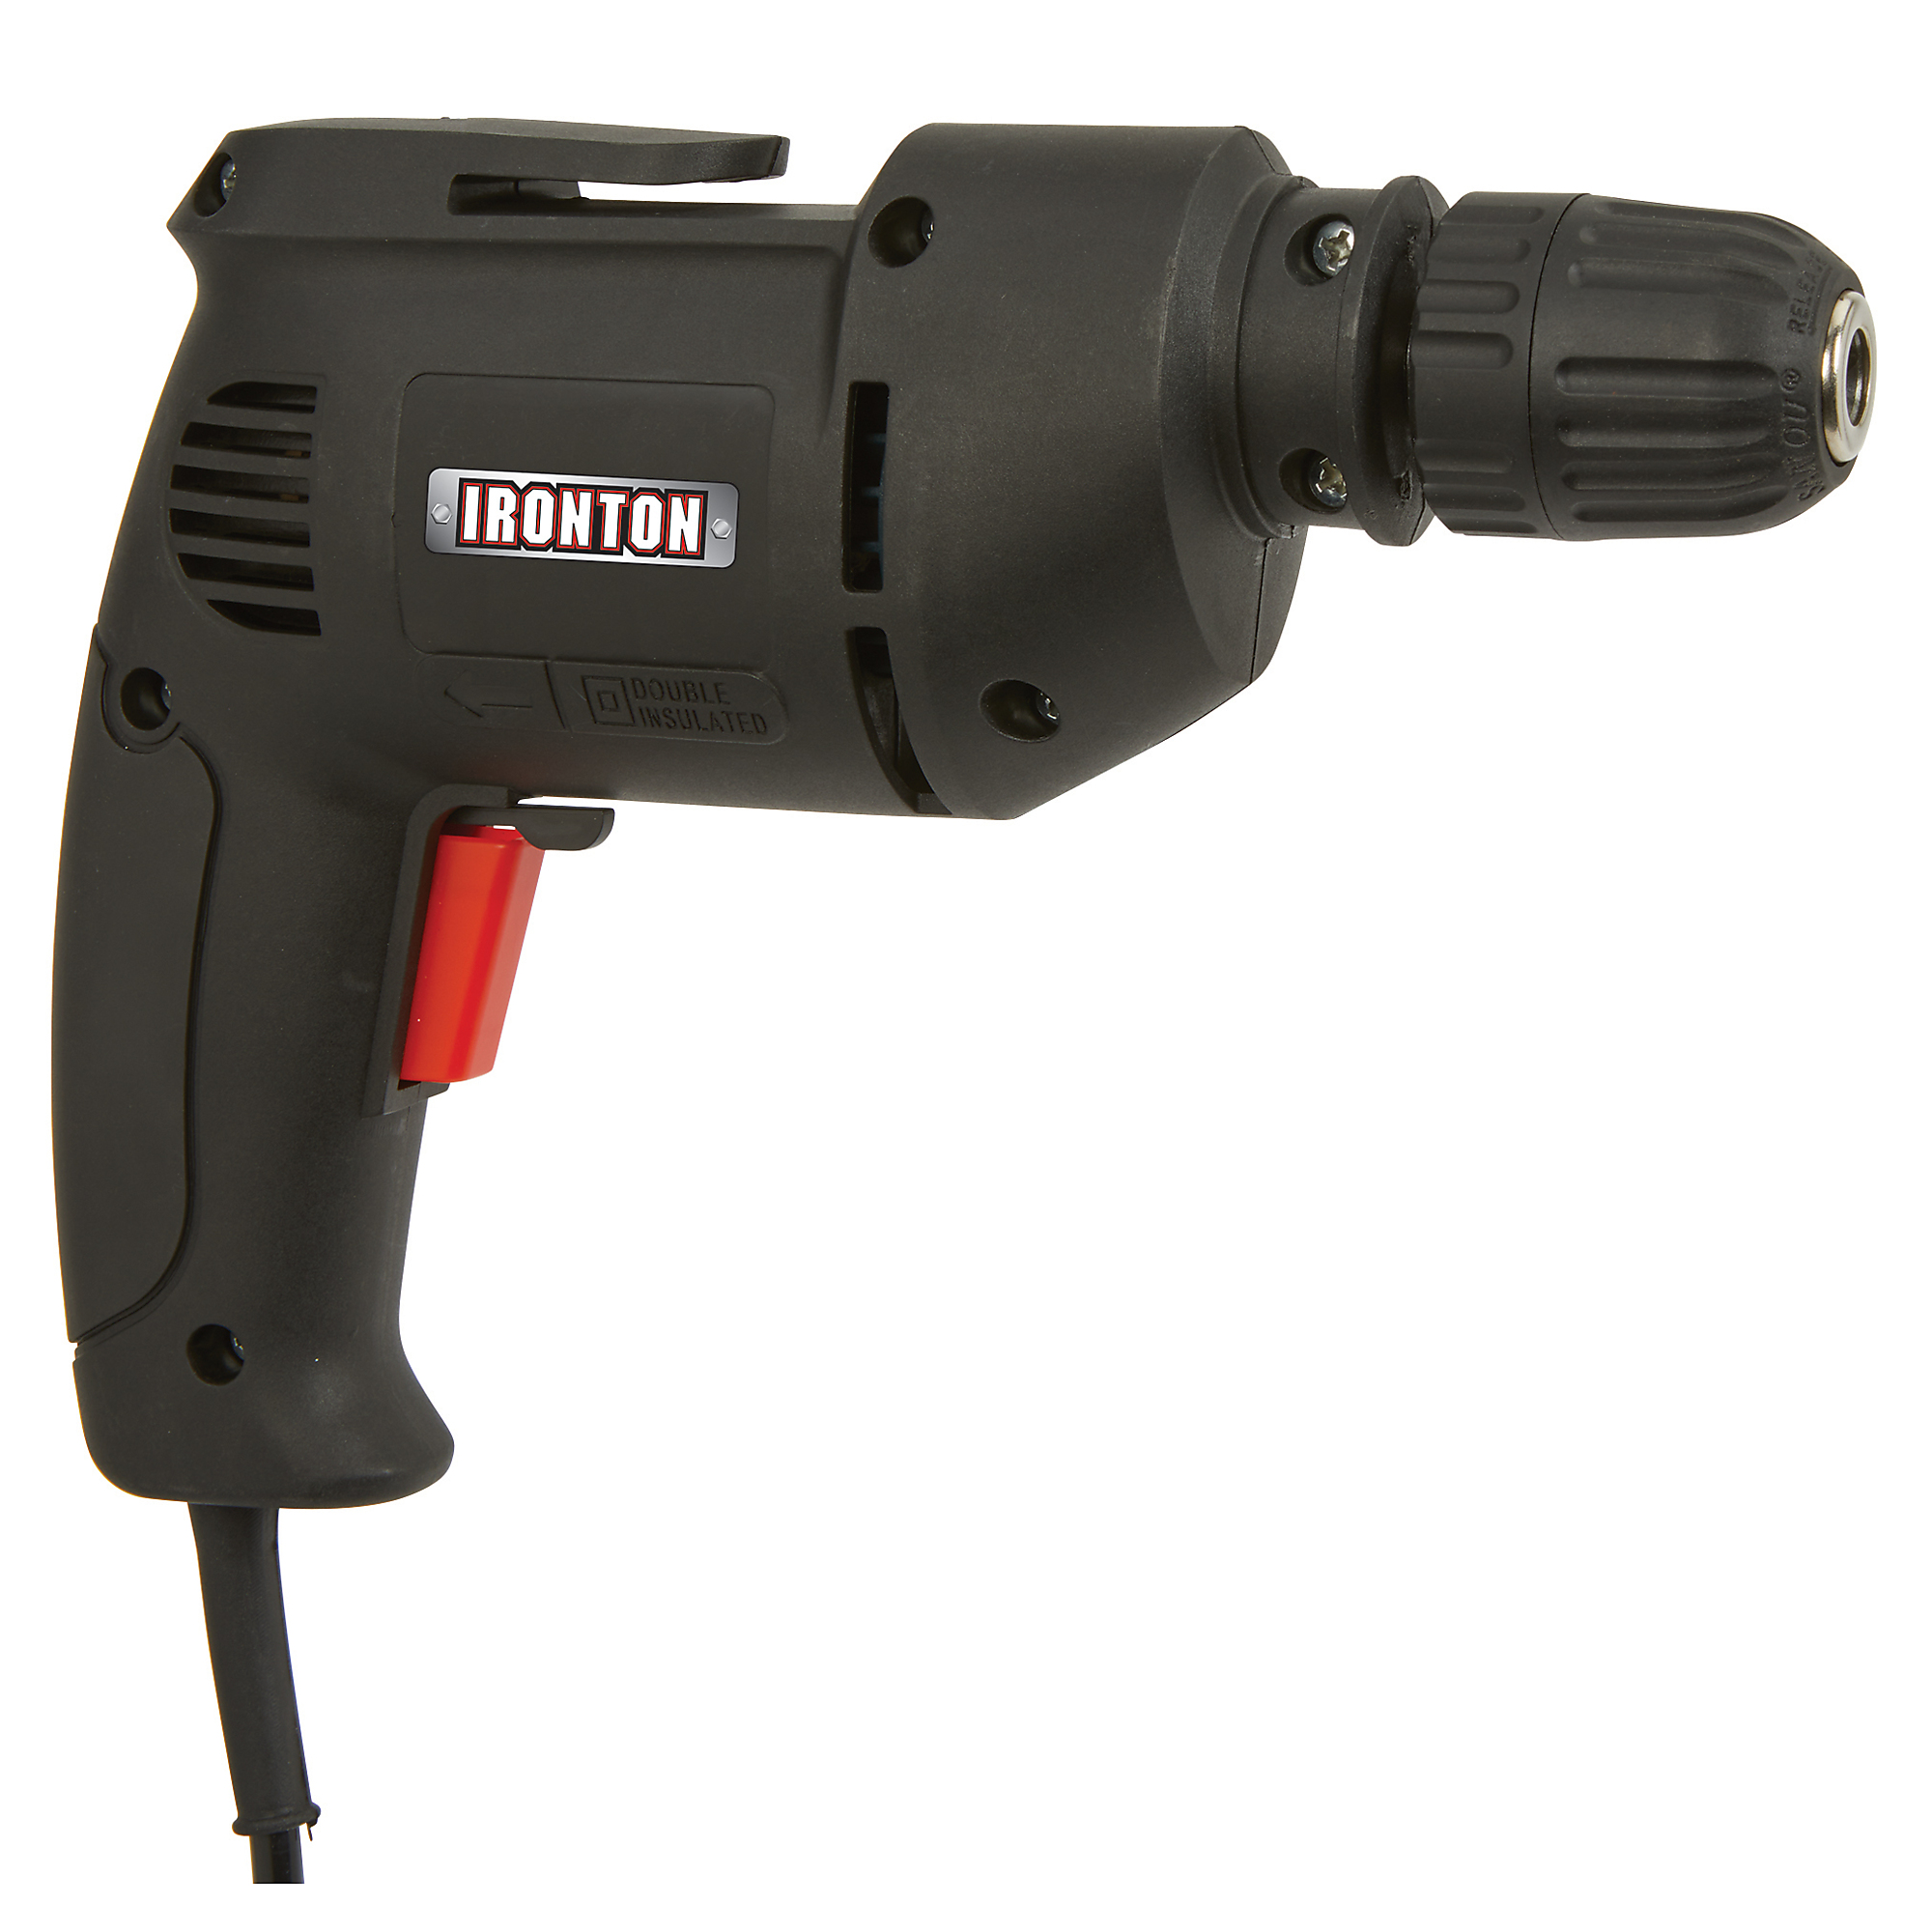 Ironton Variable-Speed Drill, 3/8Inch Keyless Chuck, 3.2 Amps, 120 Volts, 3000 Max. RPM, Model ED108